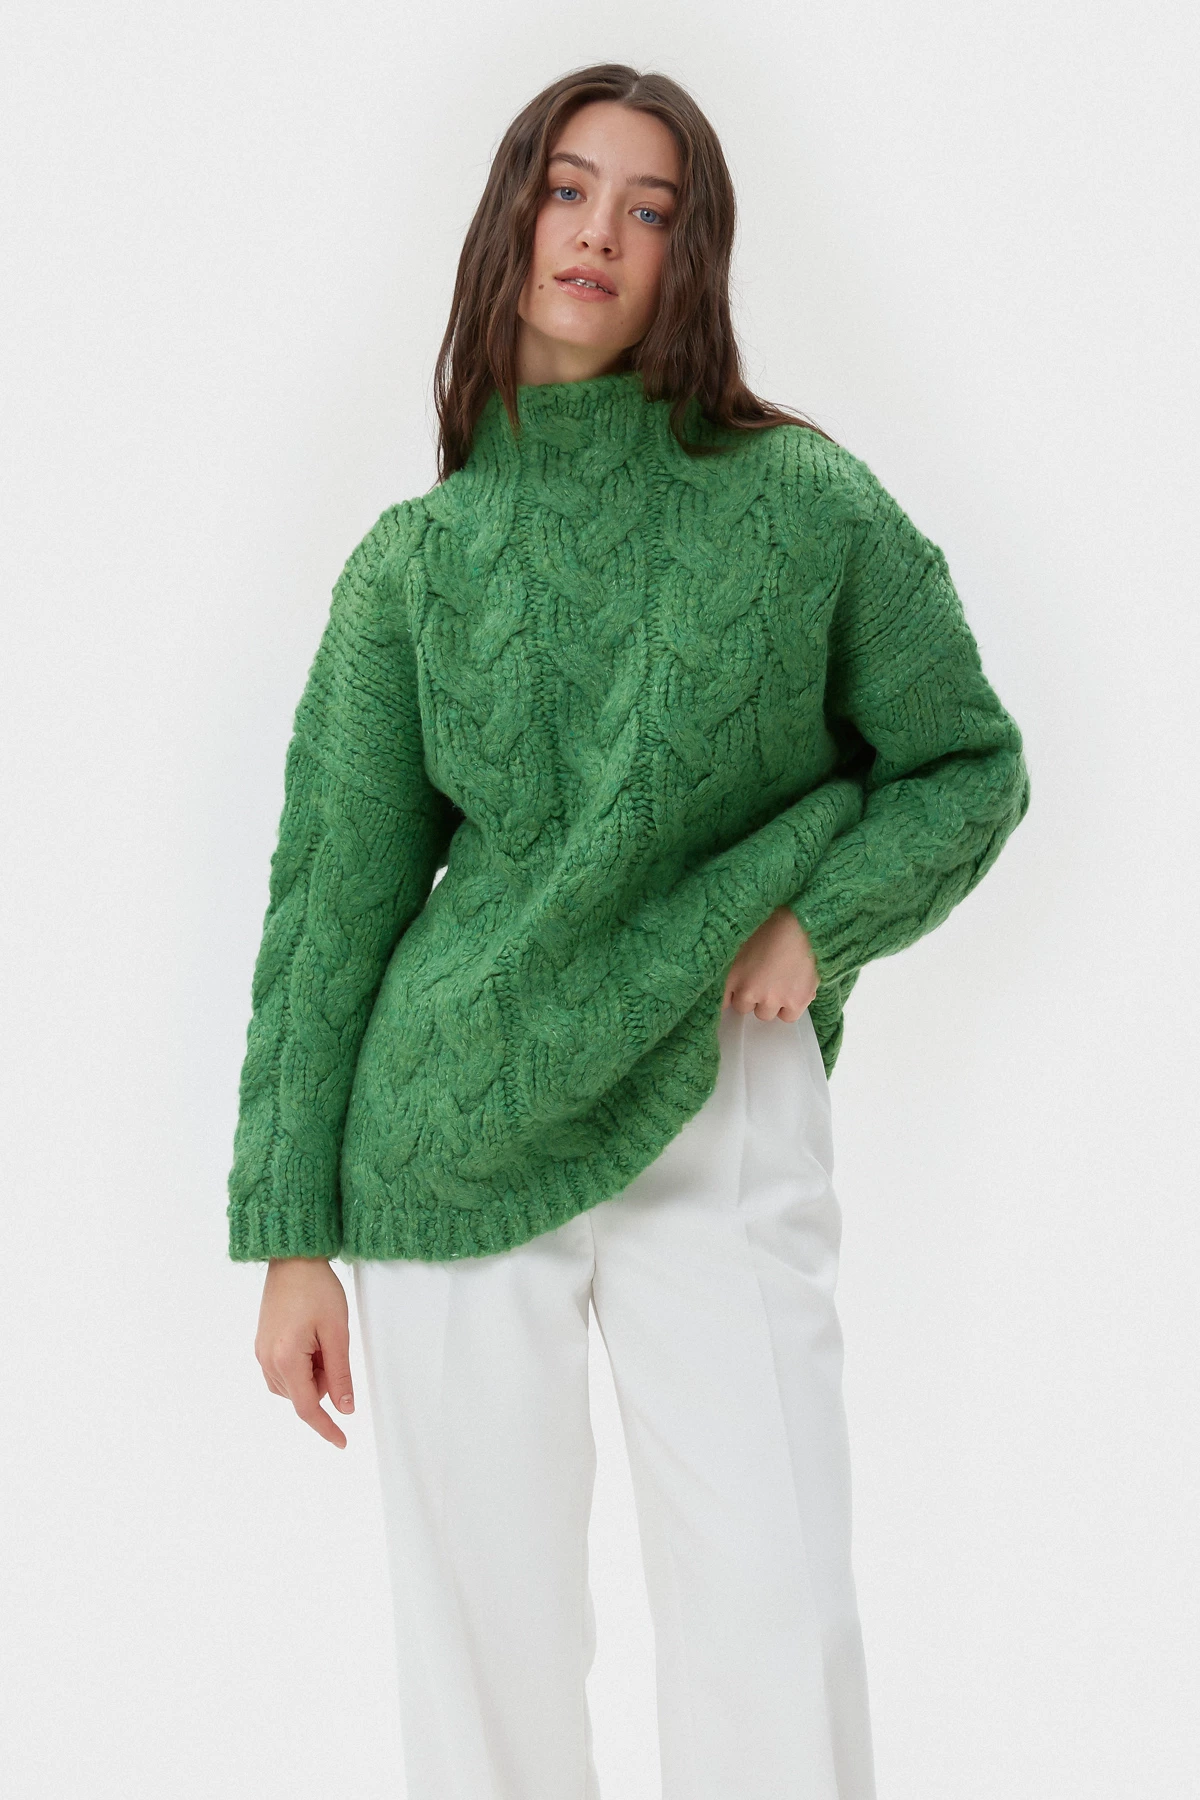 Green elongated sweater in "braids" with cotton, photo 4